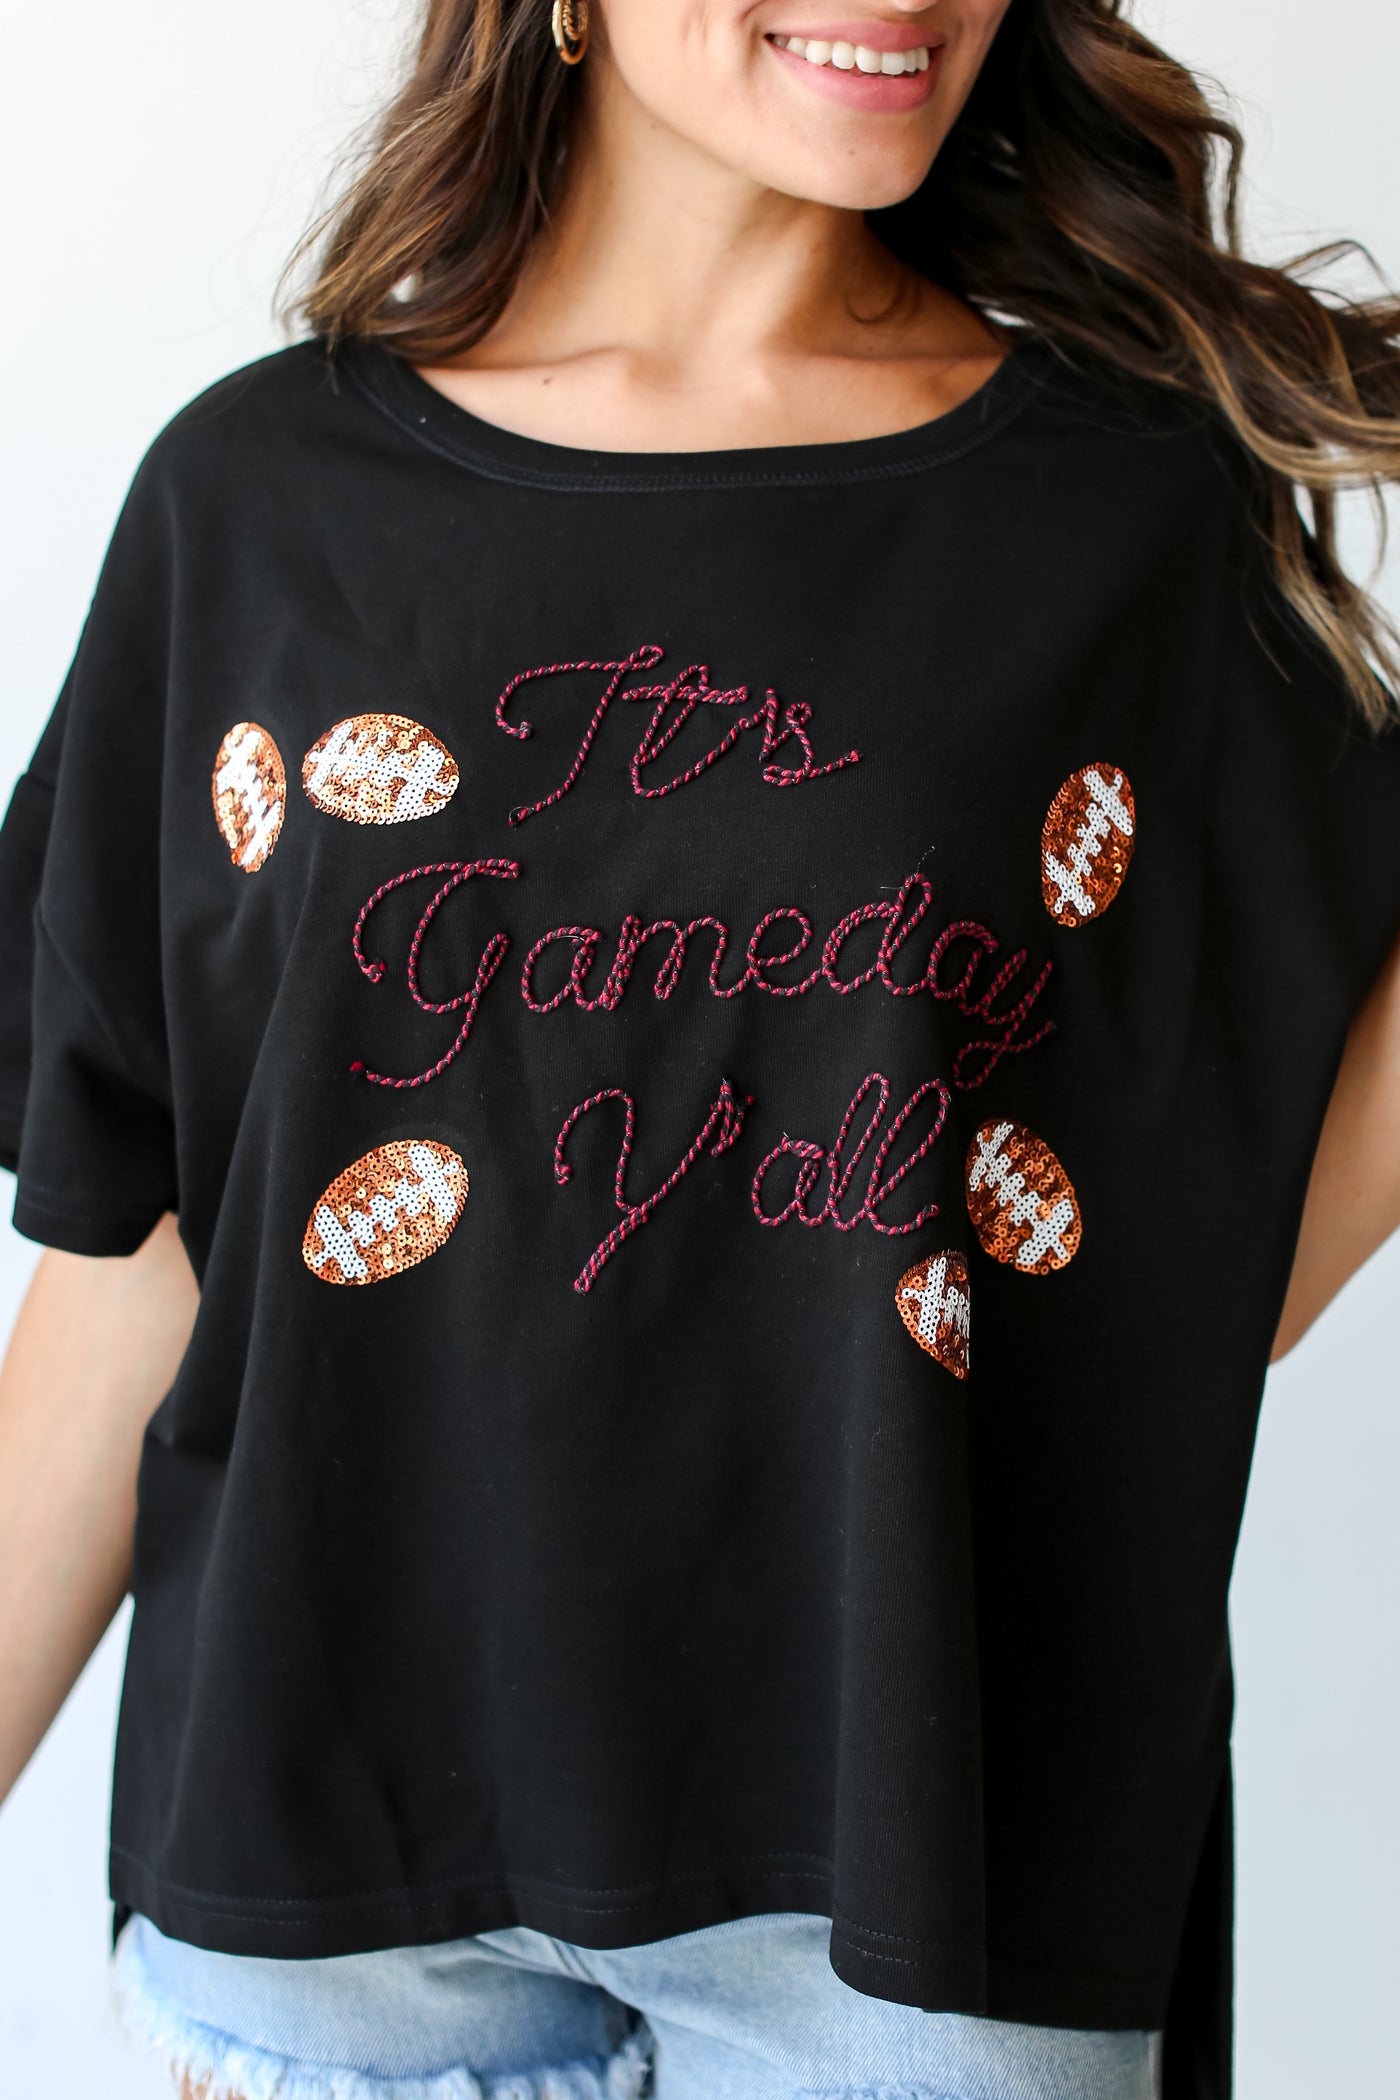 It's Game Day Y'all Sequin Football Tee on model